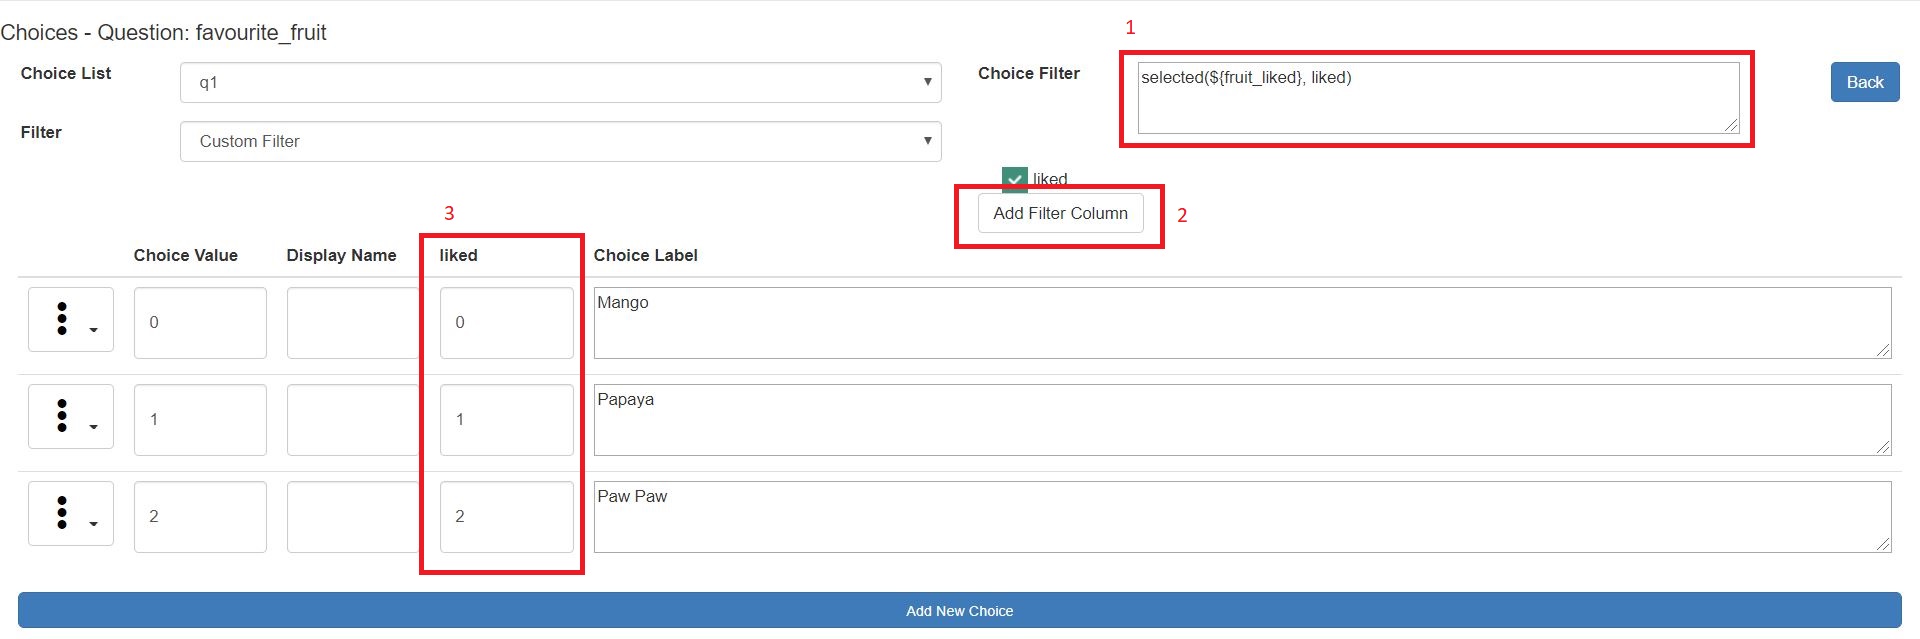 Choices being specified using Online choice Filter